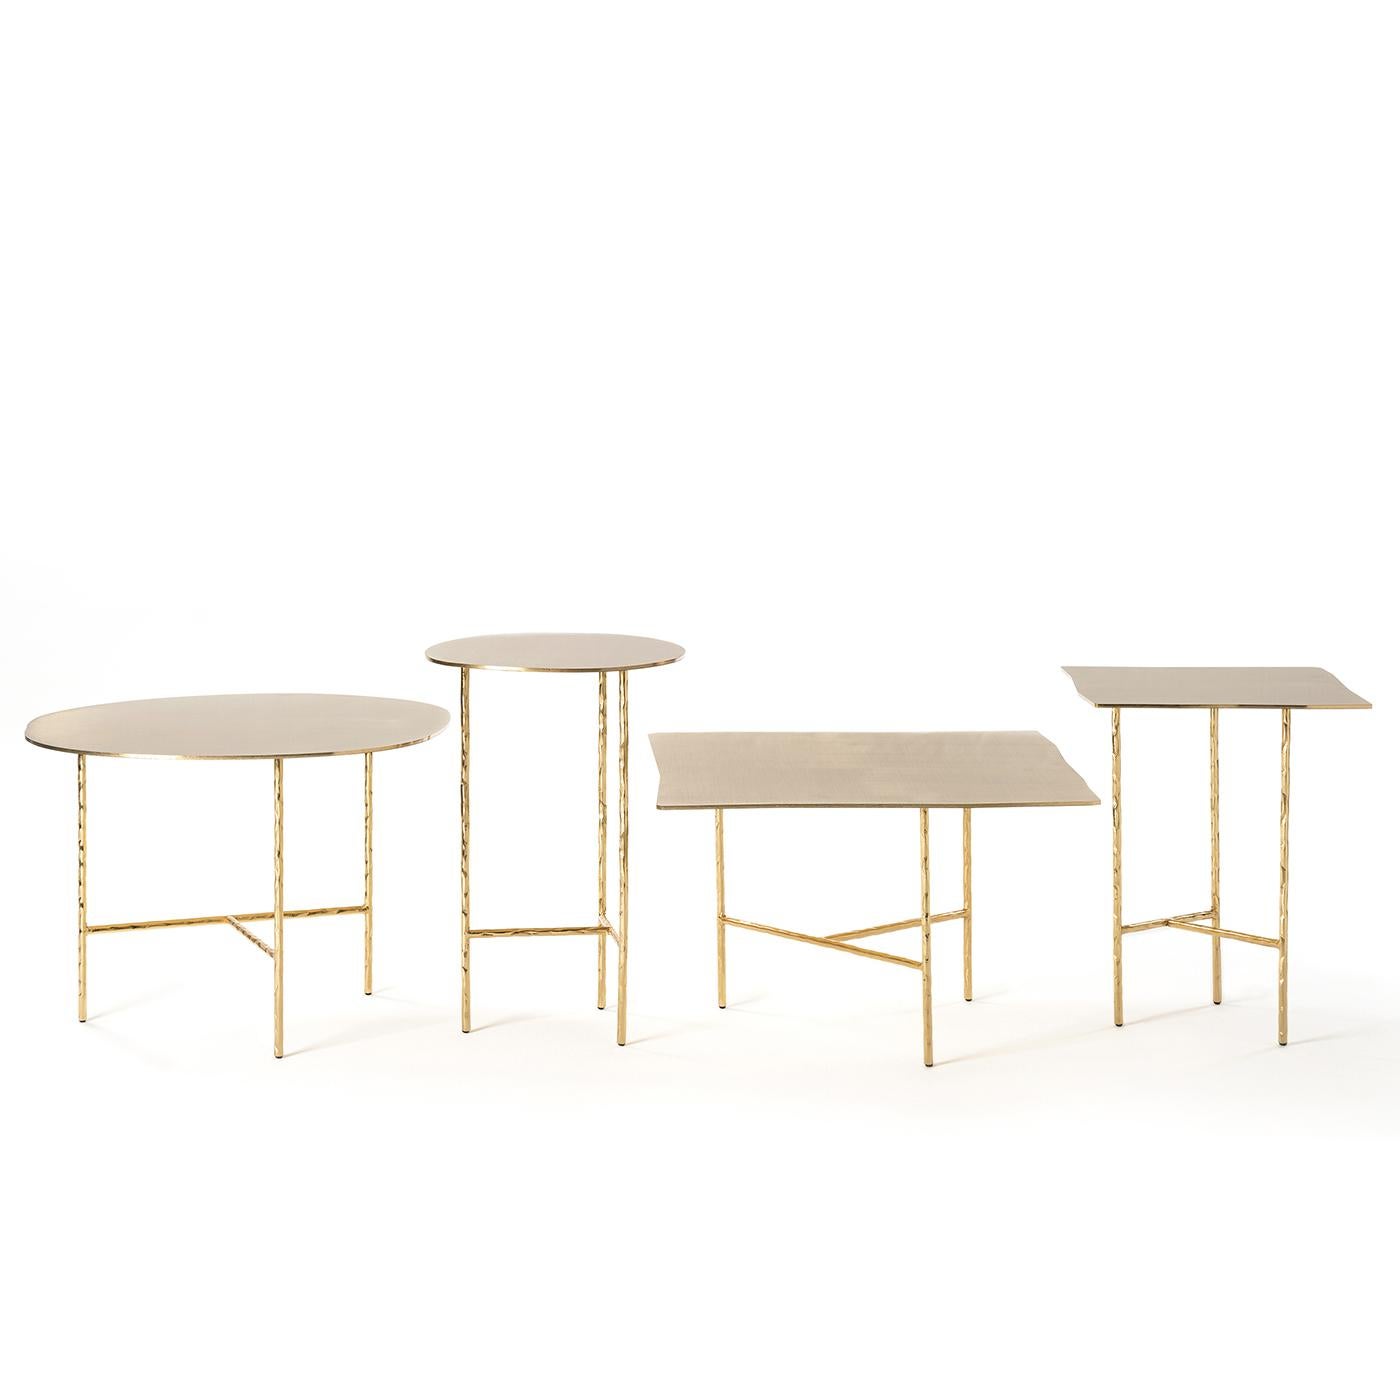 The XXX series of tables designed by Lapo Ciatti is defined by the striking contrast between the perfectly polished finish and the imperfectly shaped silhouette that makes them unique. Crafted of stainless steel with a 24-karat gold-plated finish,